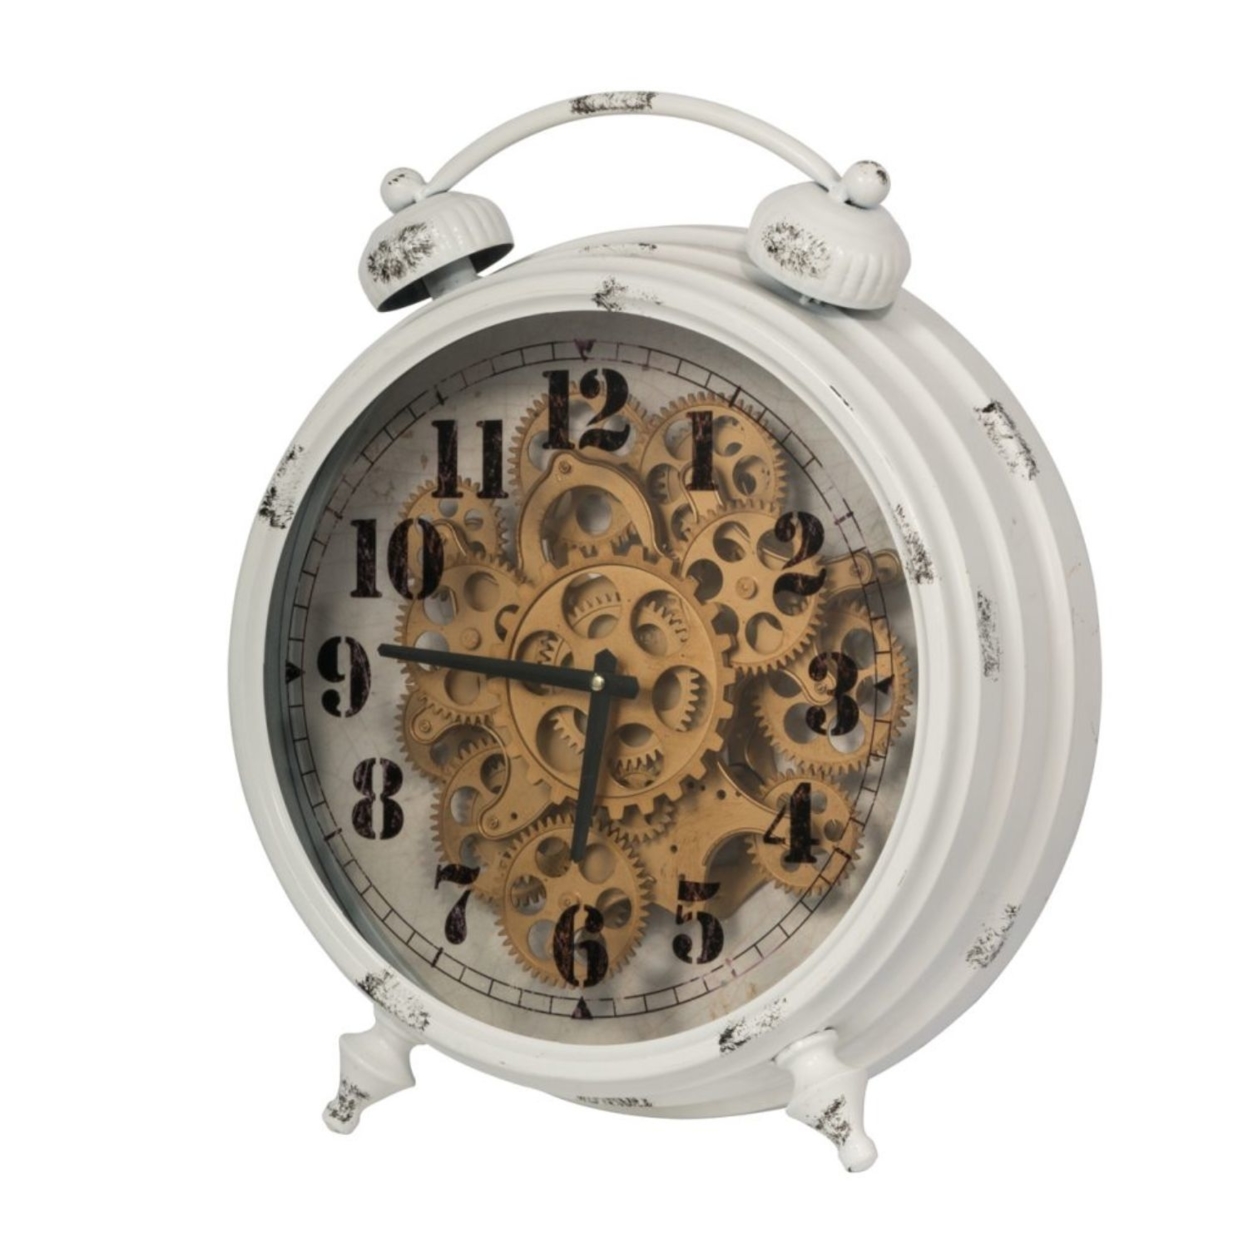 Classic Metal Table Clock With Gears Front And Distressed Details, White And Gold- Saltoro Sherpi